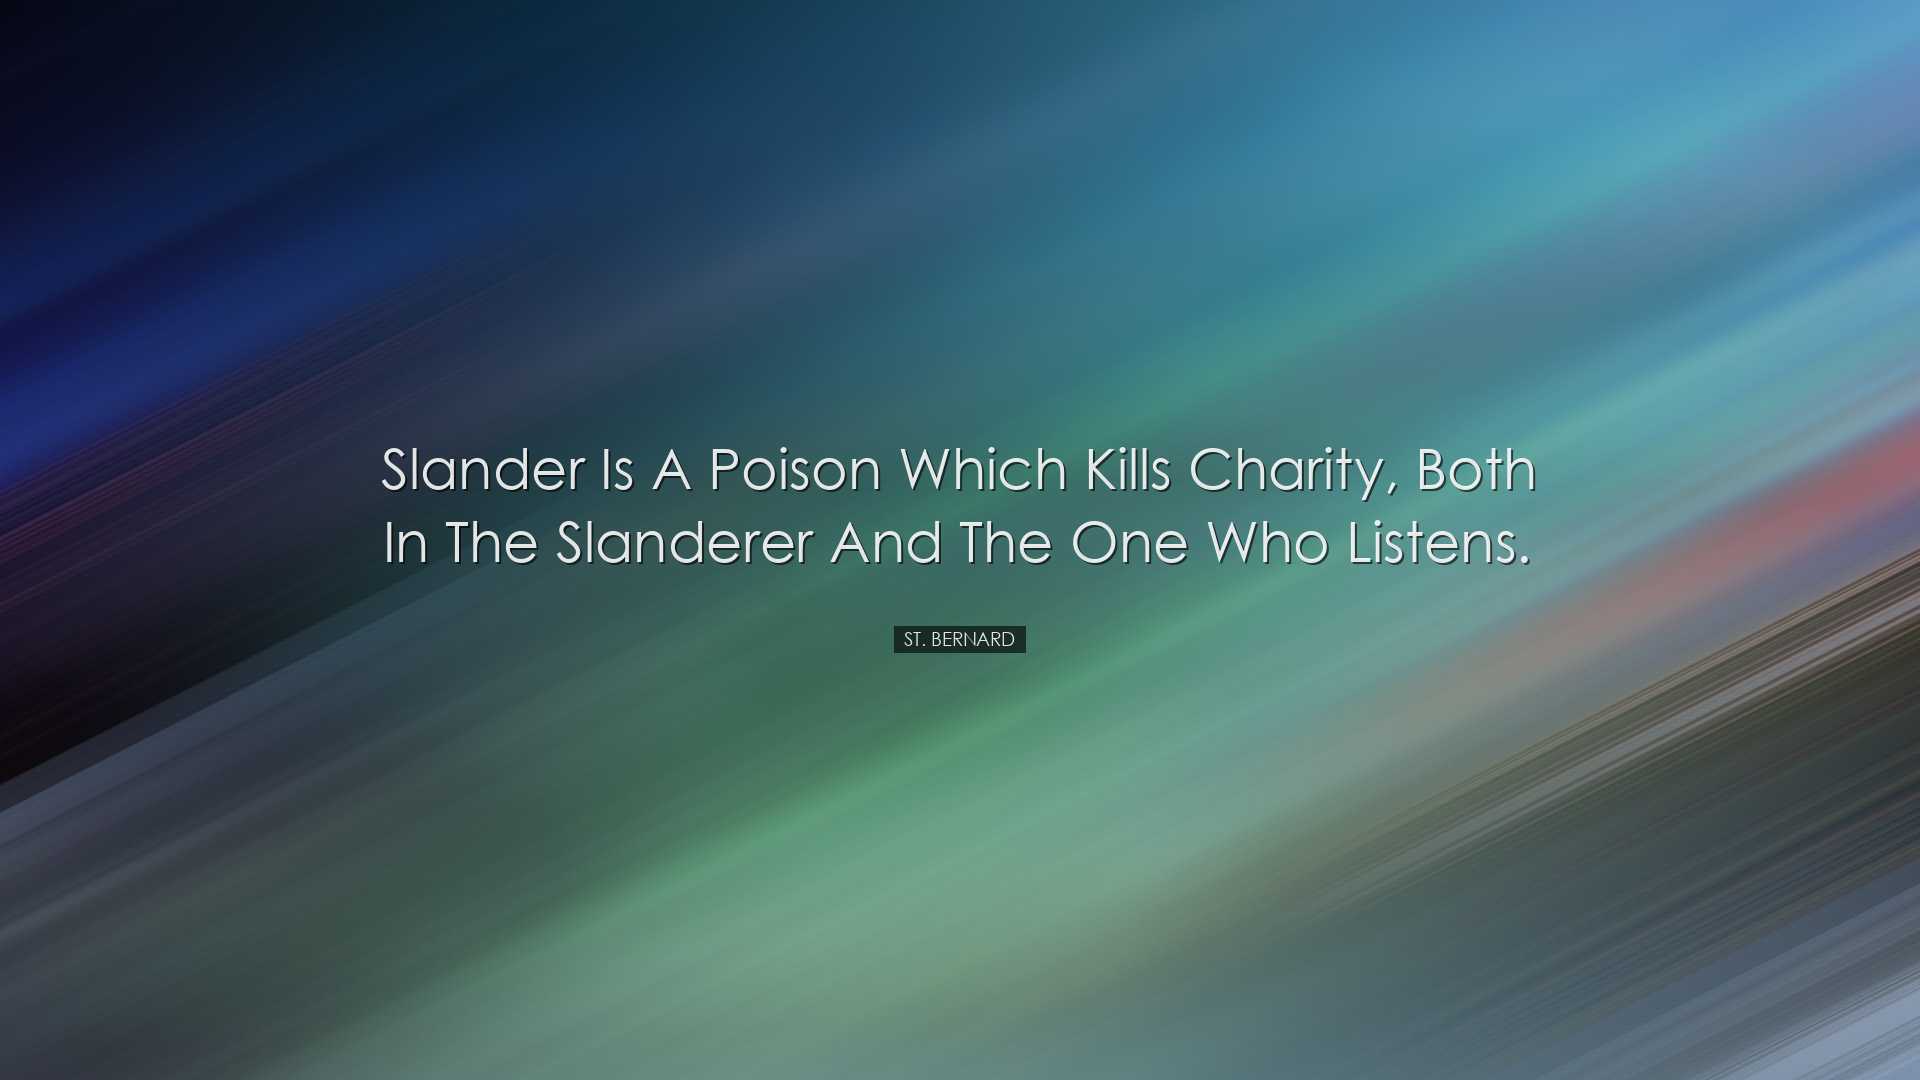 Slander is a poison which kills charity, both in the slanderer and